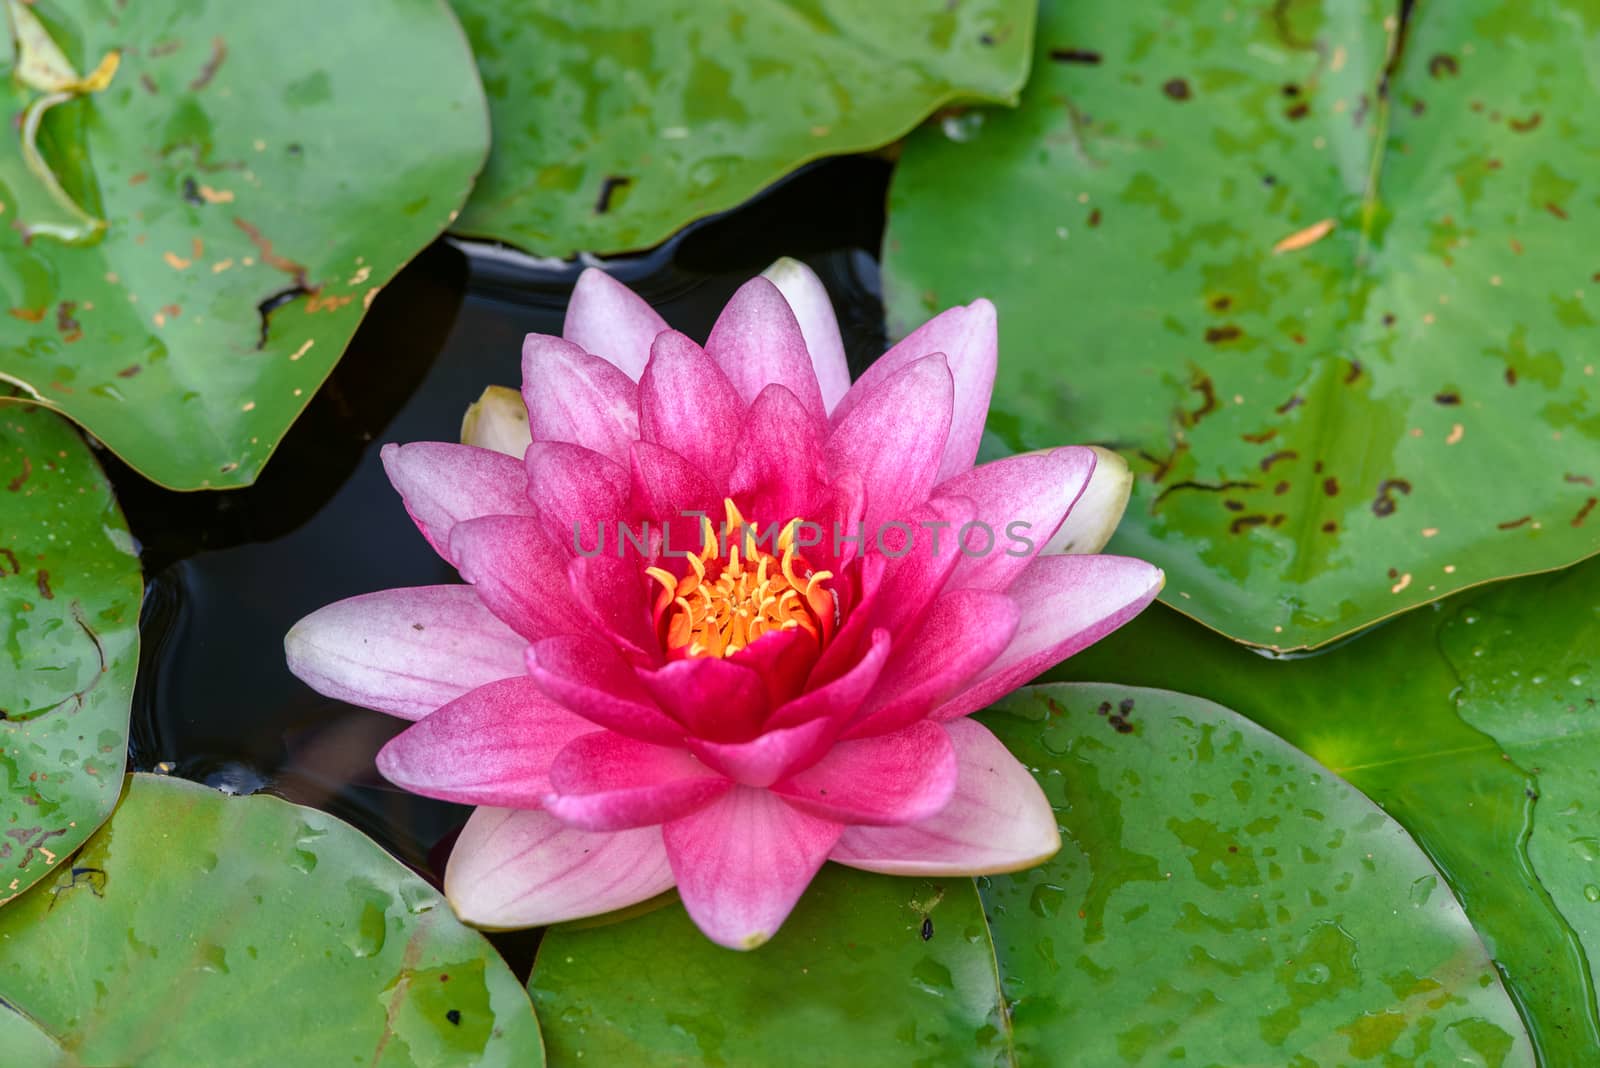 Beautiful pink water lily surrounded by green leaves on a pond.